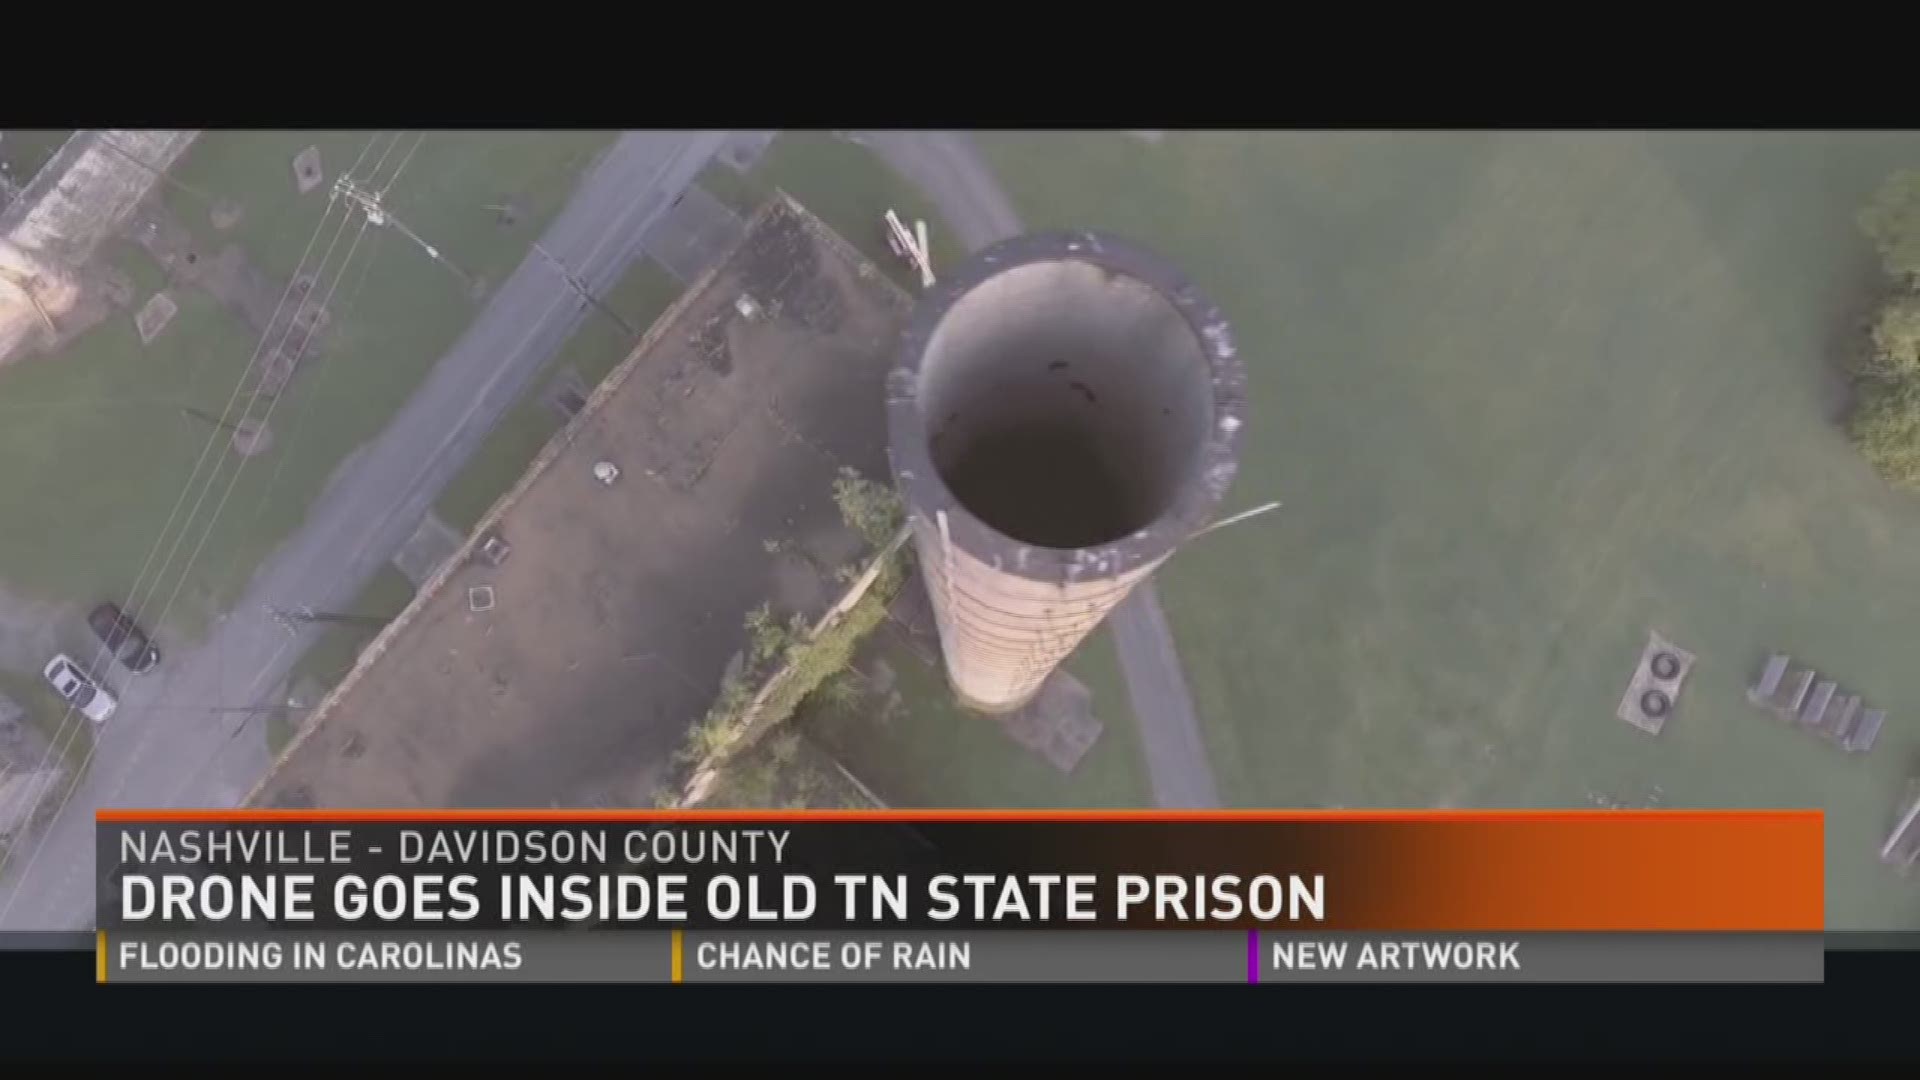 Oct. 13, 2016: The Tennessee Department of Correction has released a new drone video giving people an inside look at the old Tennessee State Prison.